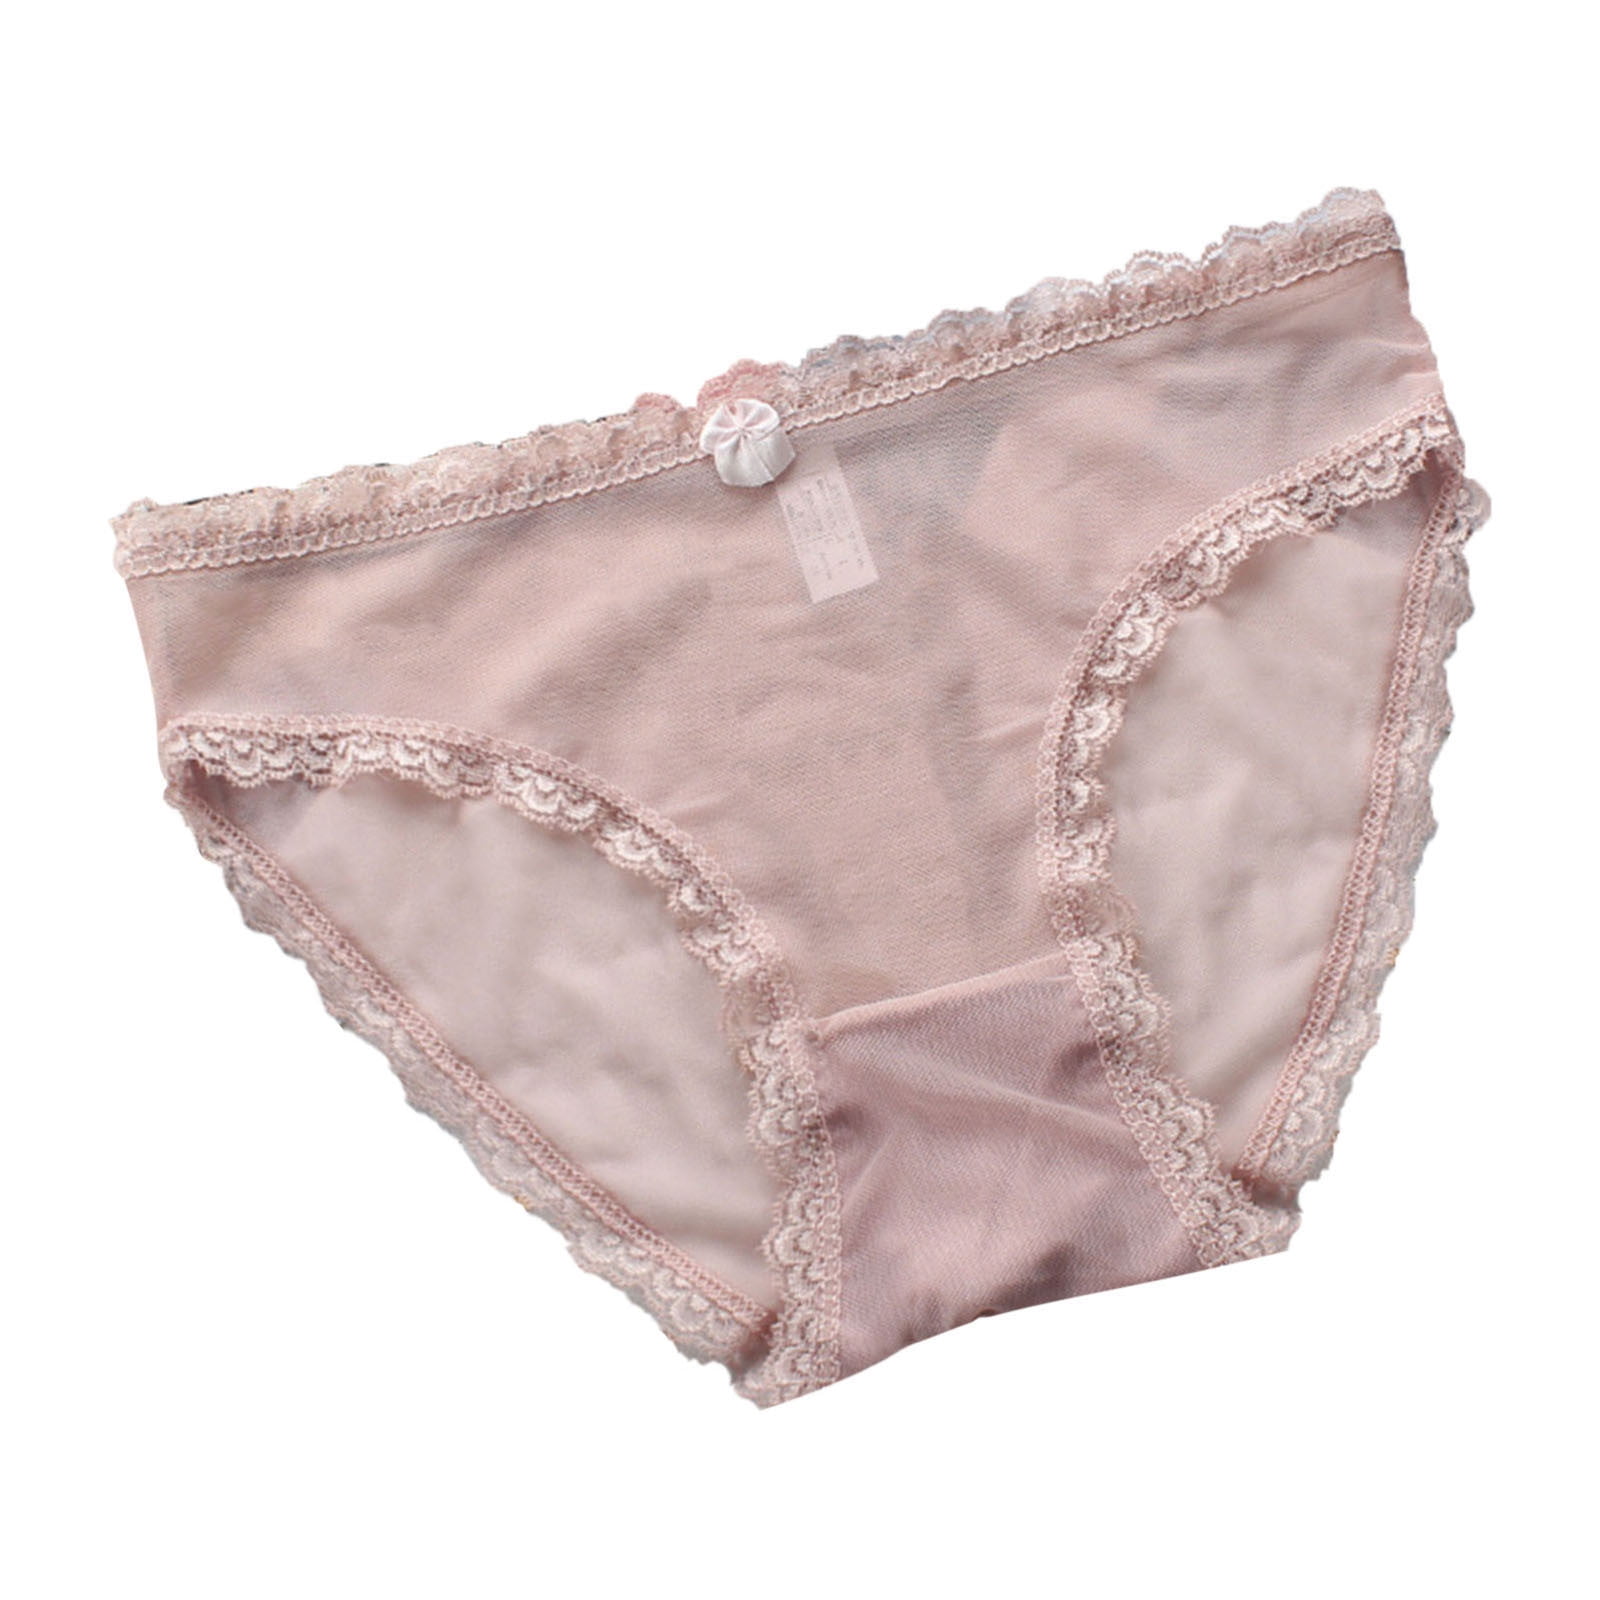 Ladies Soft Lace Panty, Shop Today. Get it Tomorrow!